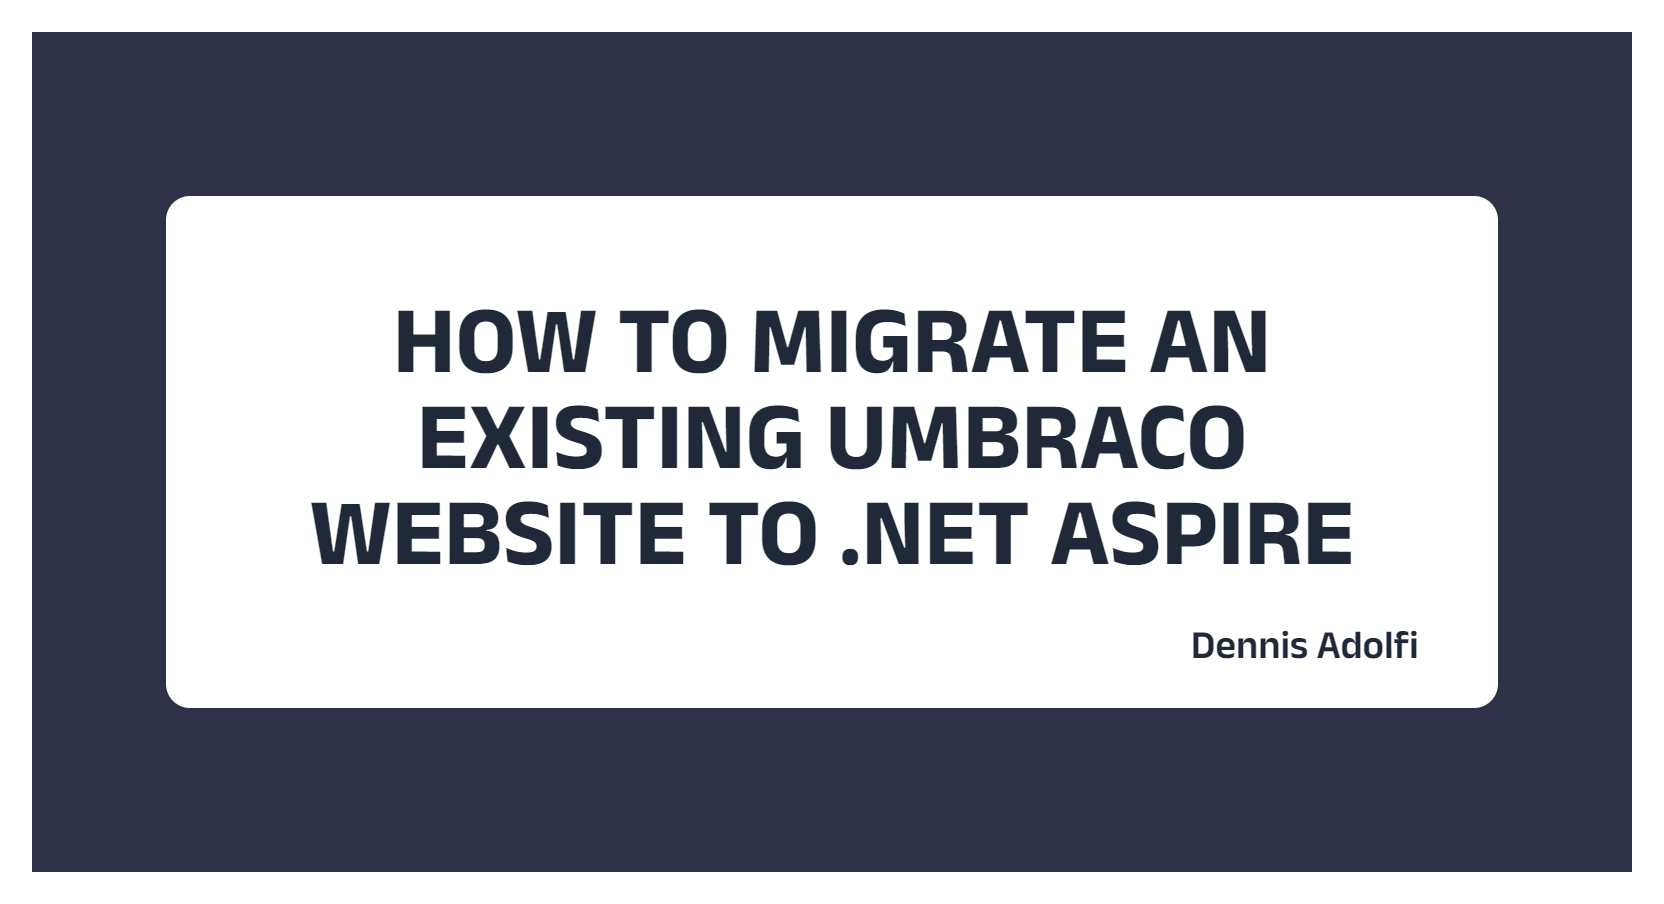 Tutorial: How to migrate an existing Umbraco website to .NET Aspire